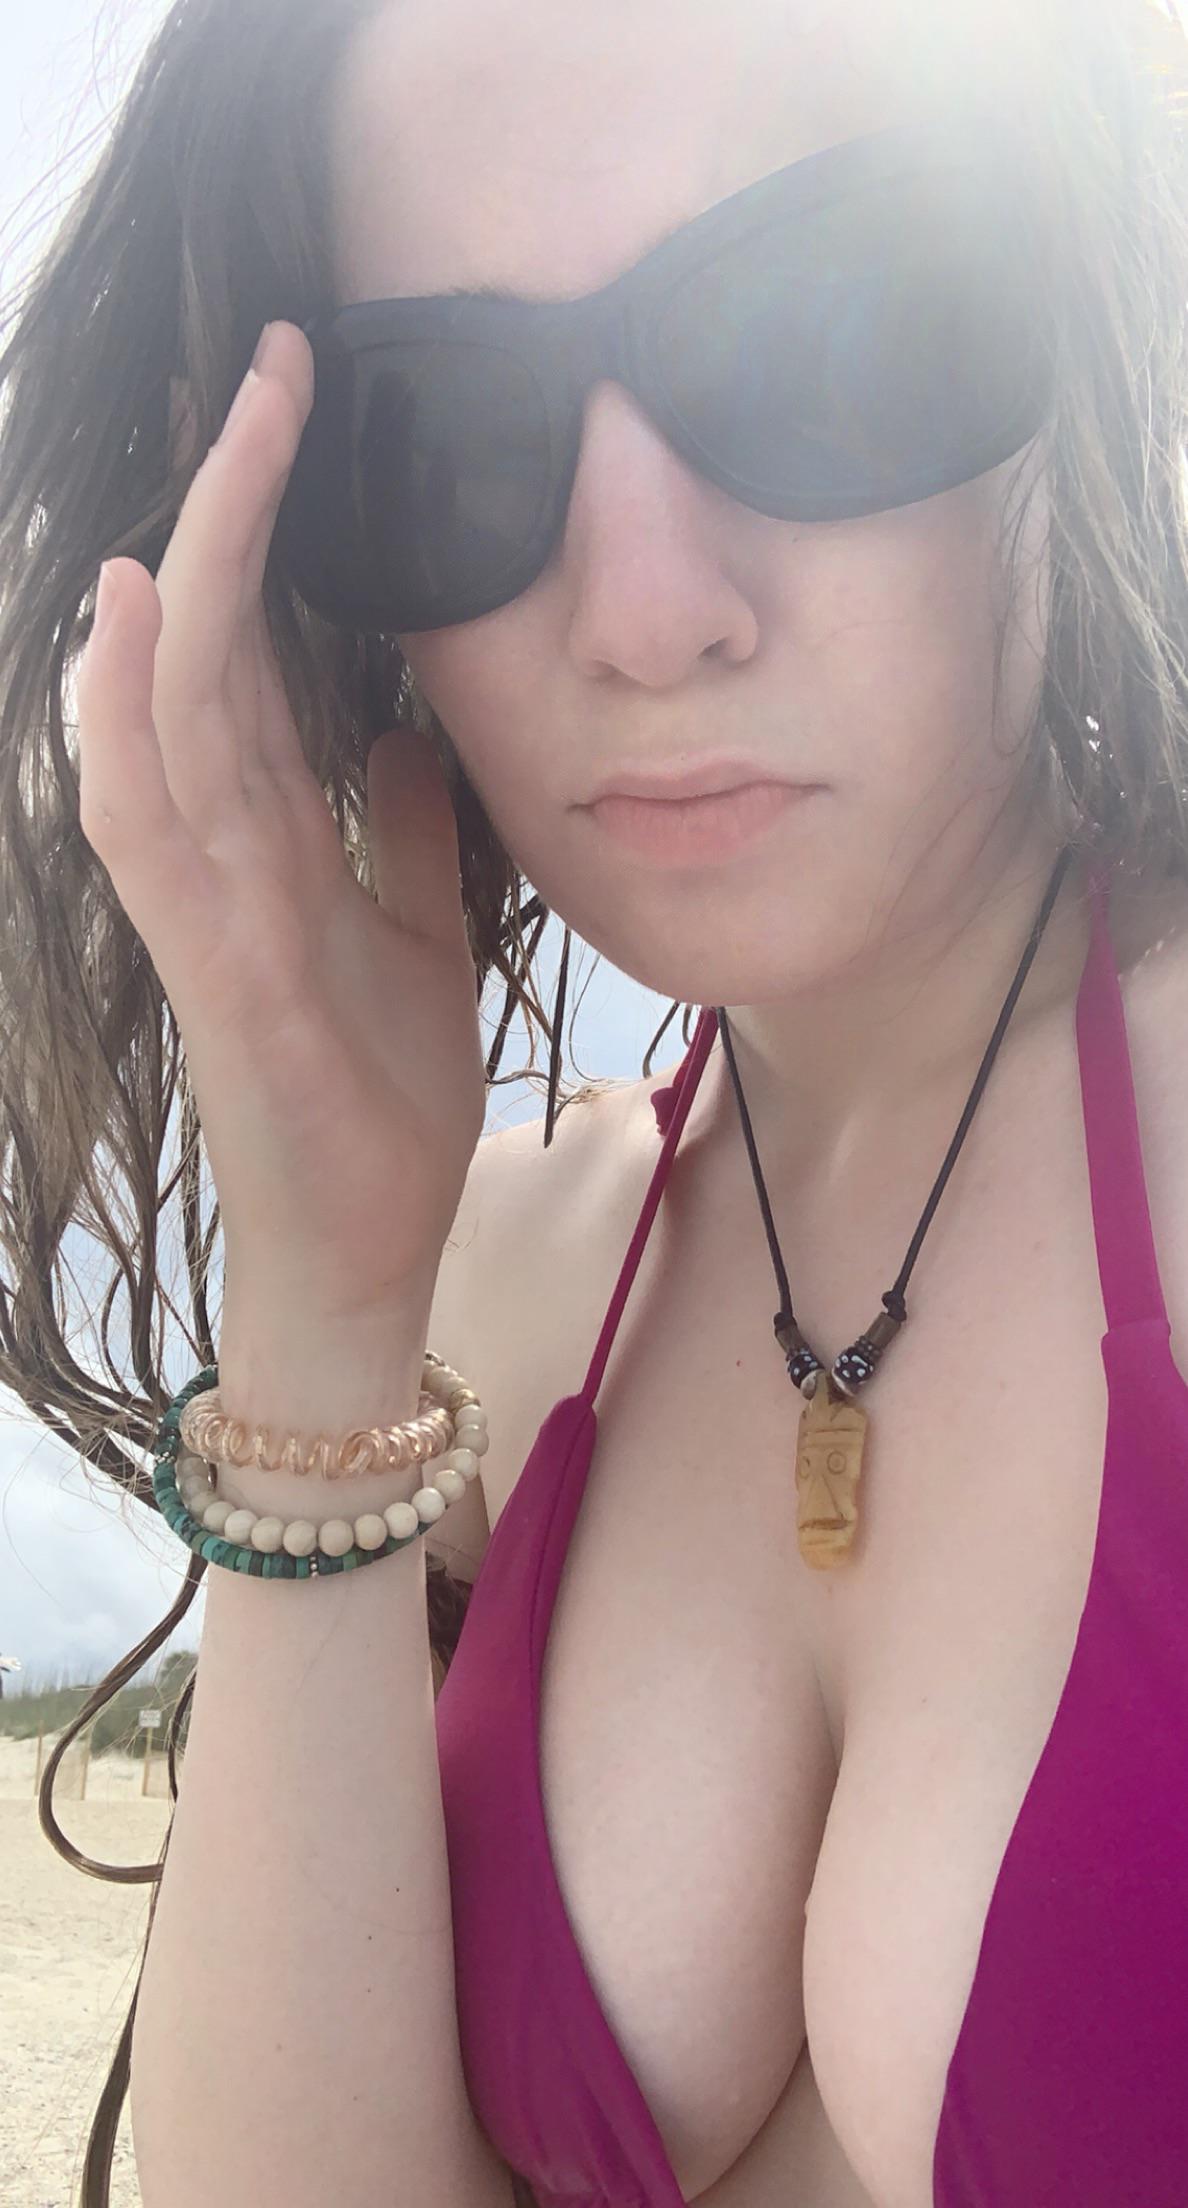 Busty and brooding at the beach???